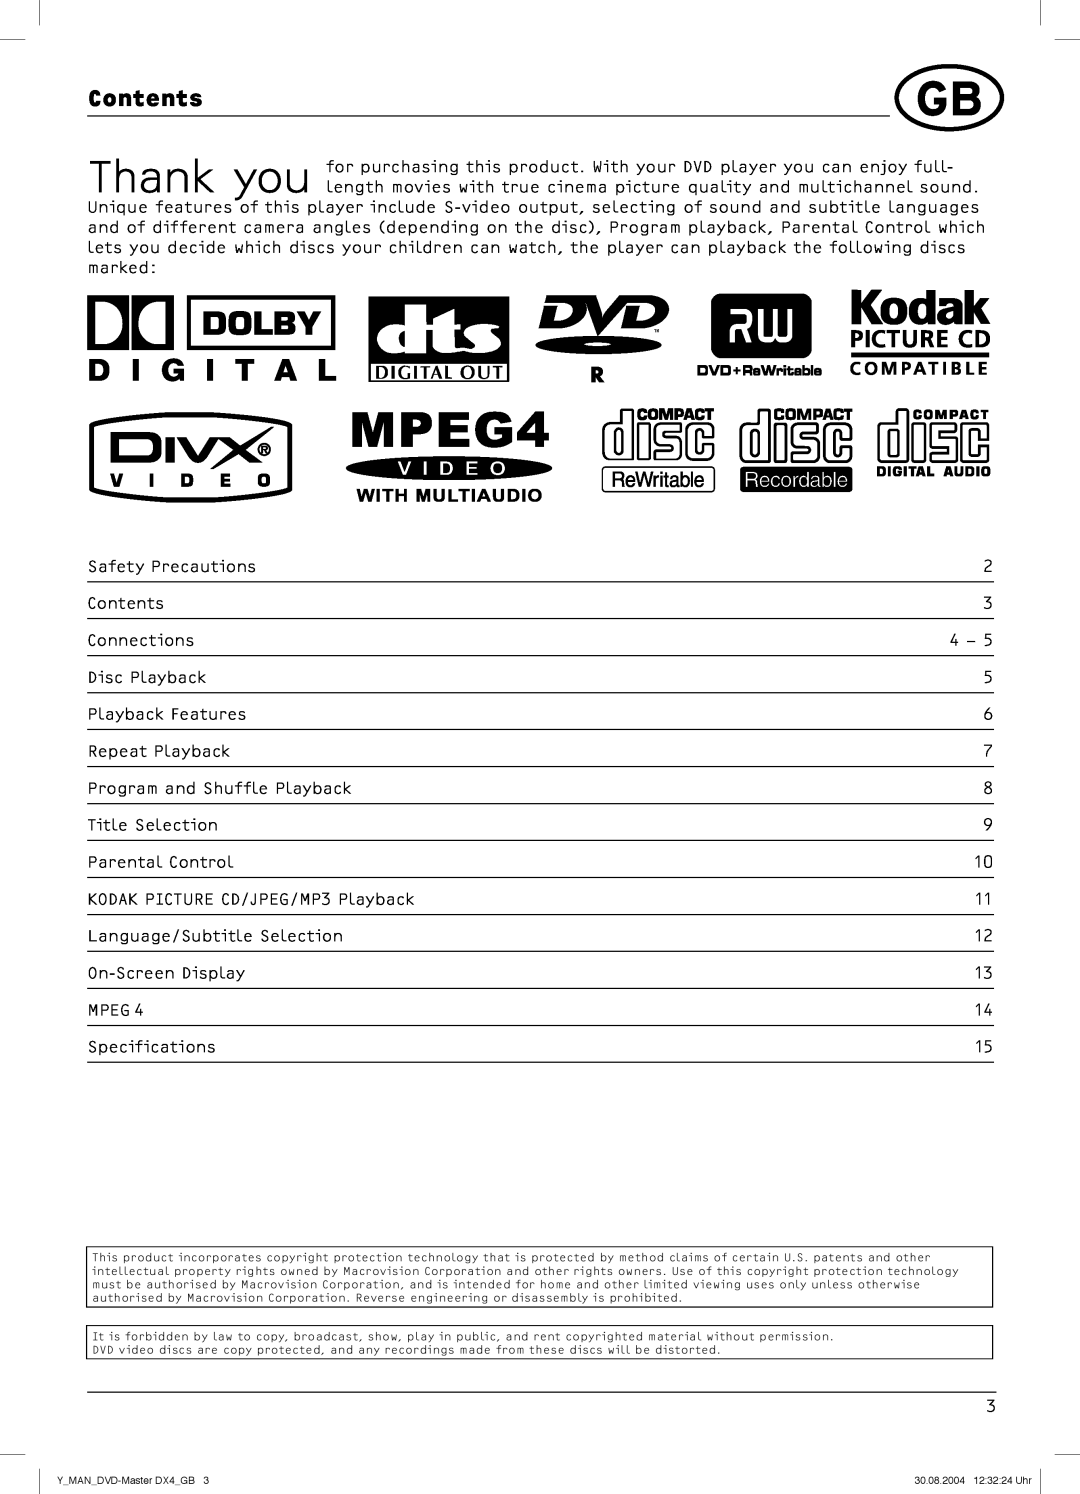 Dolby Laboratories DX4 manual Contents 